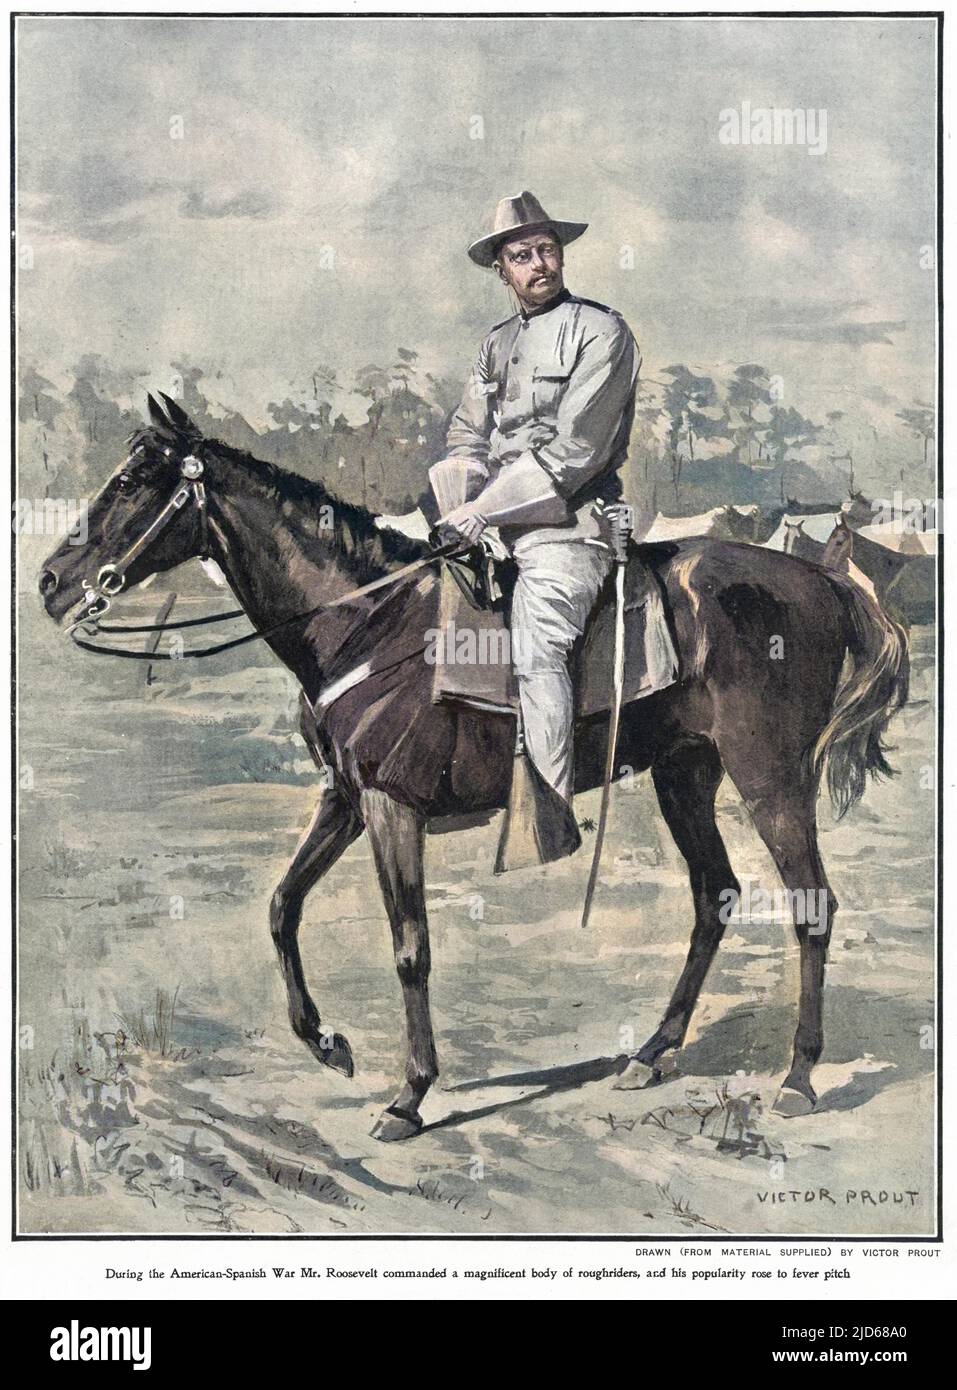 THEODORE ROOSEVELT 26th American President during the American-Spanish War in 1901, when he became popular as a commander of 'roughriders' Colourised version of : 10085636       Date: 1858 - 1919 Stock Photo